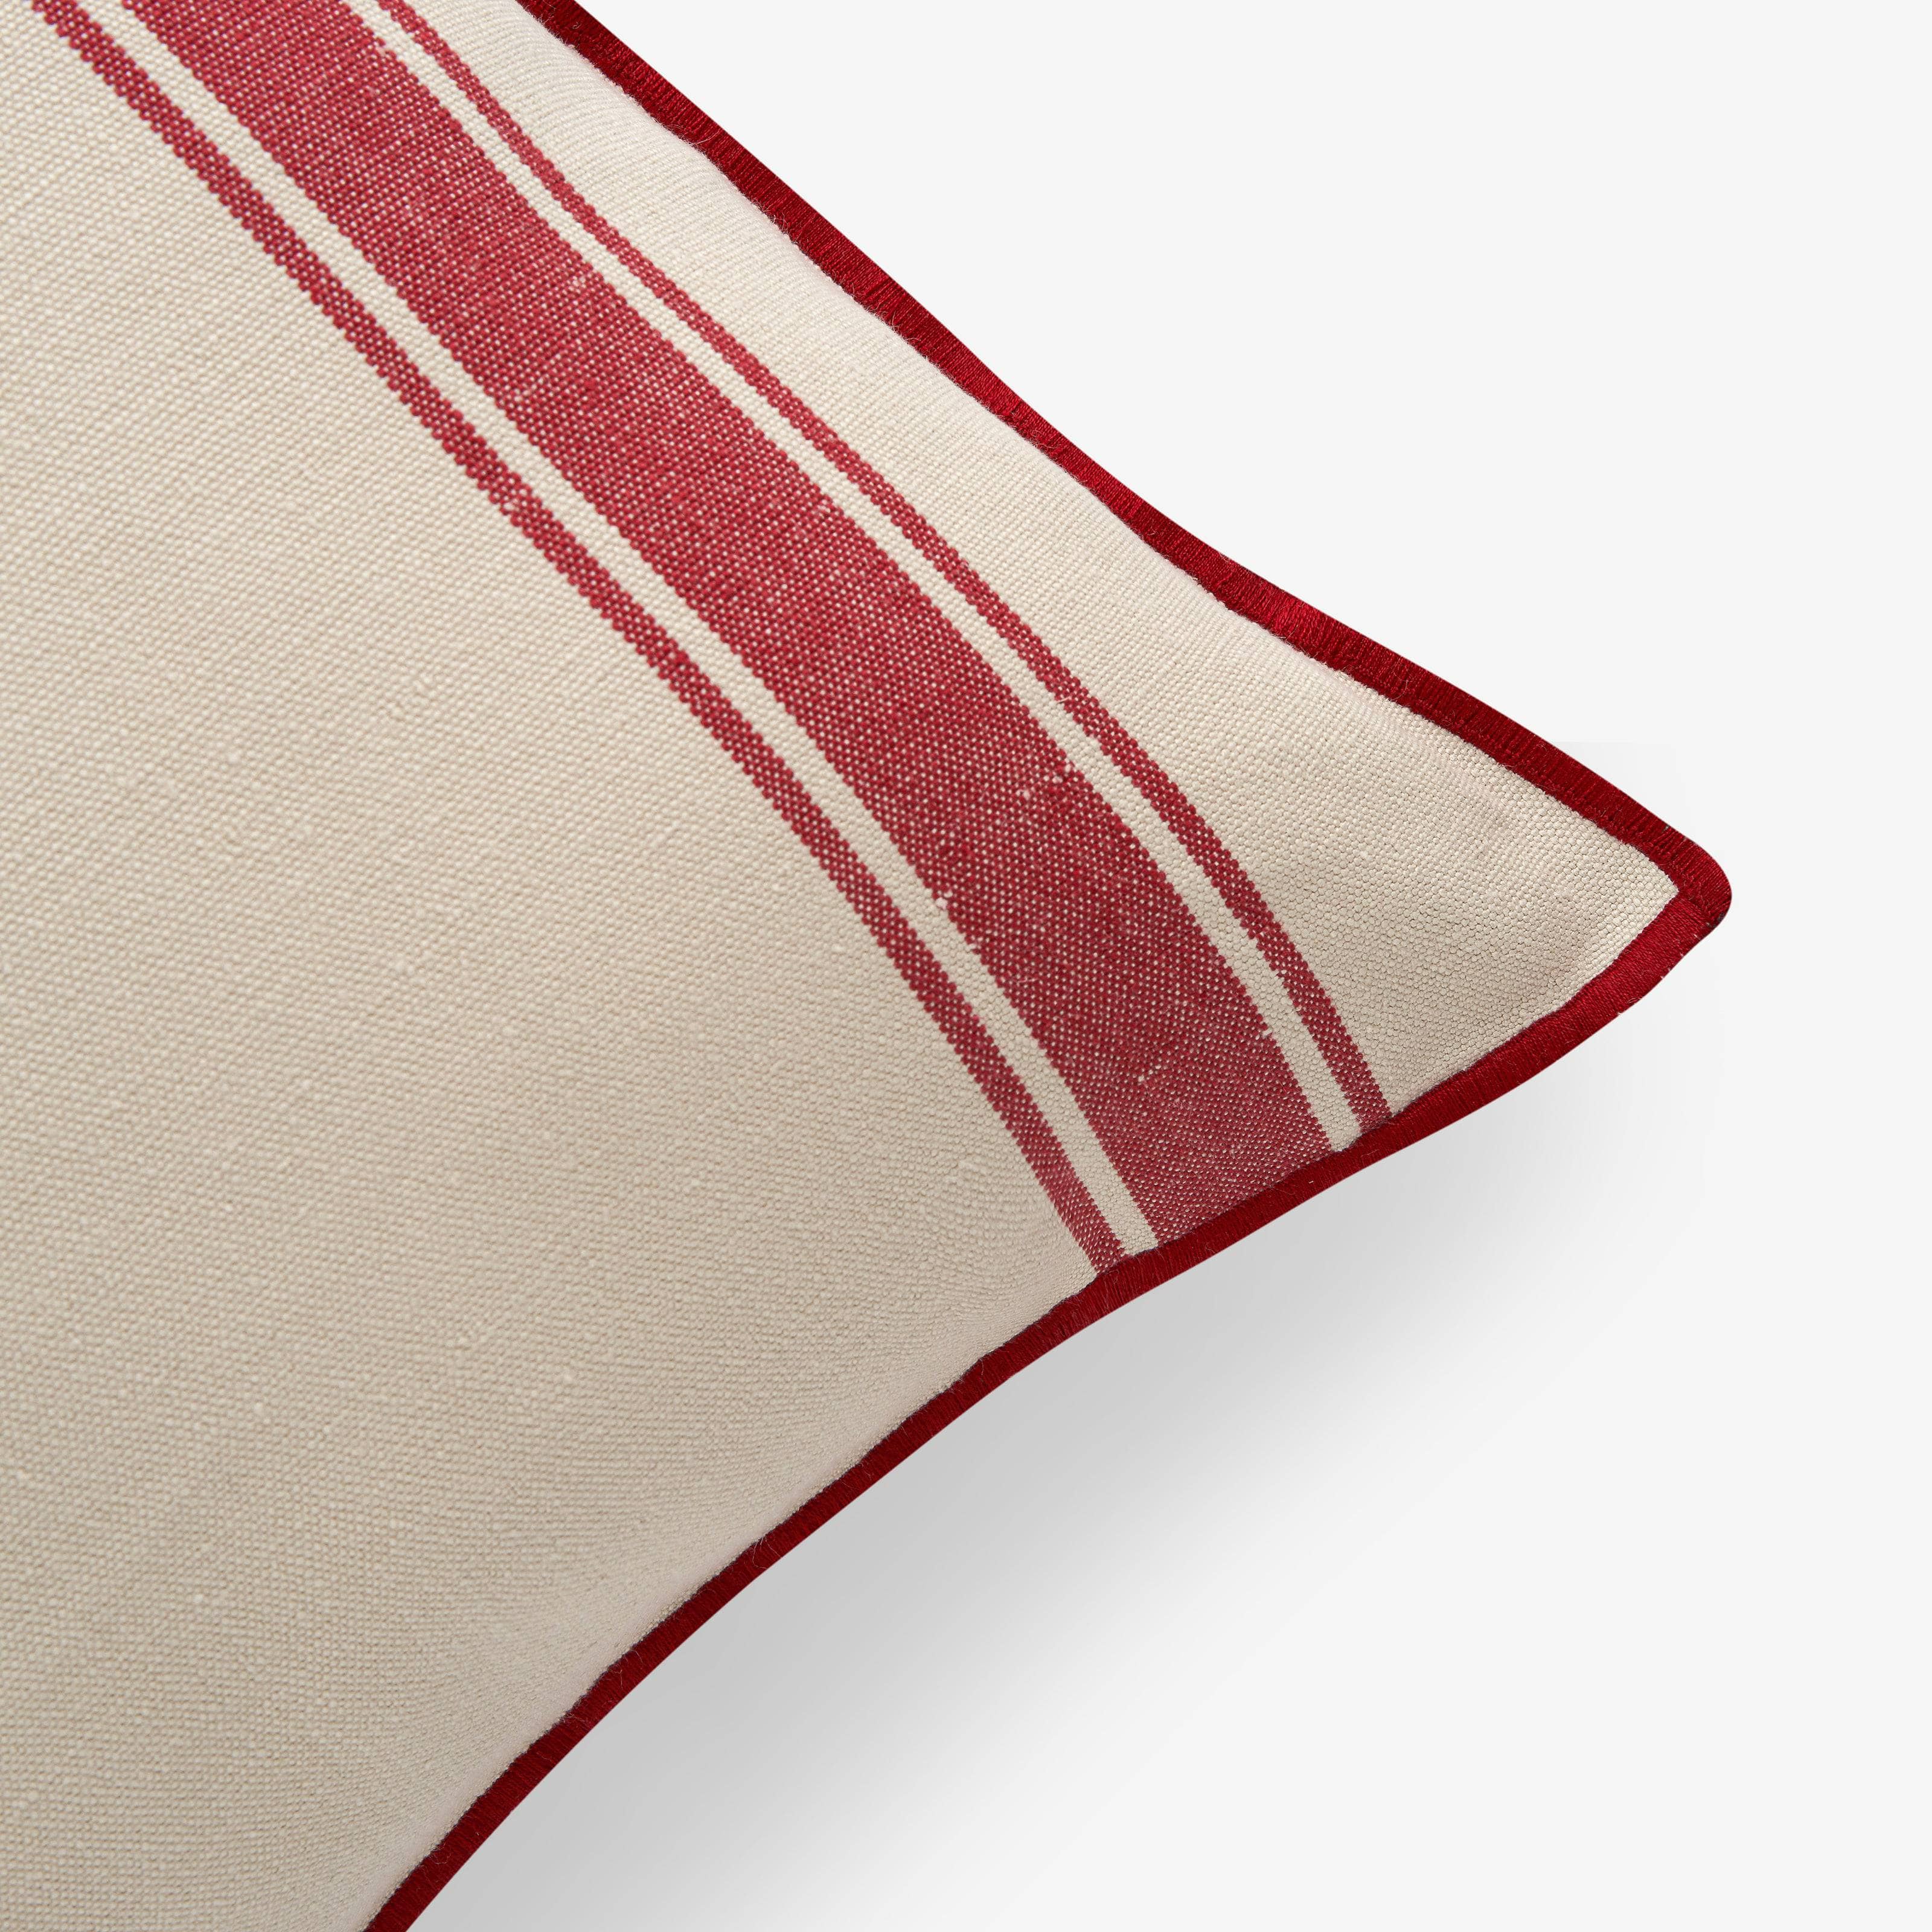 Lido Striped Linen Cushion Cover, Natural - Red, 45x45 cm - 4